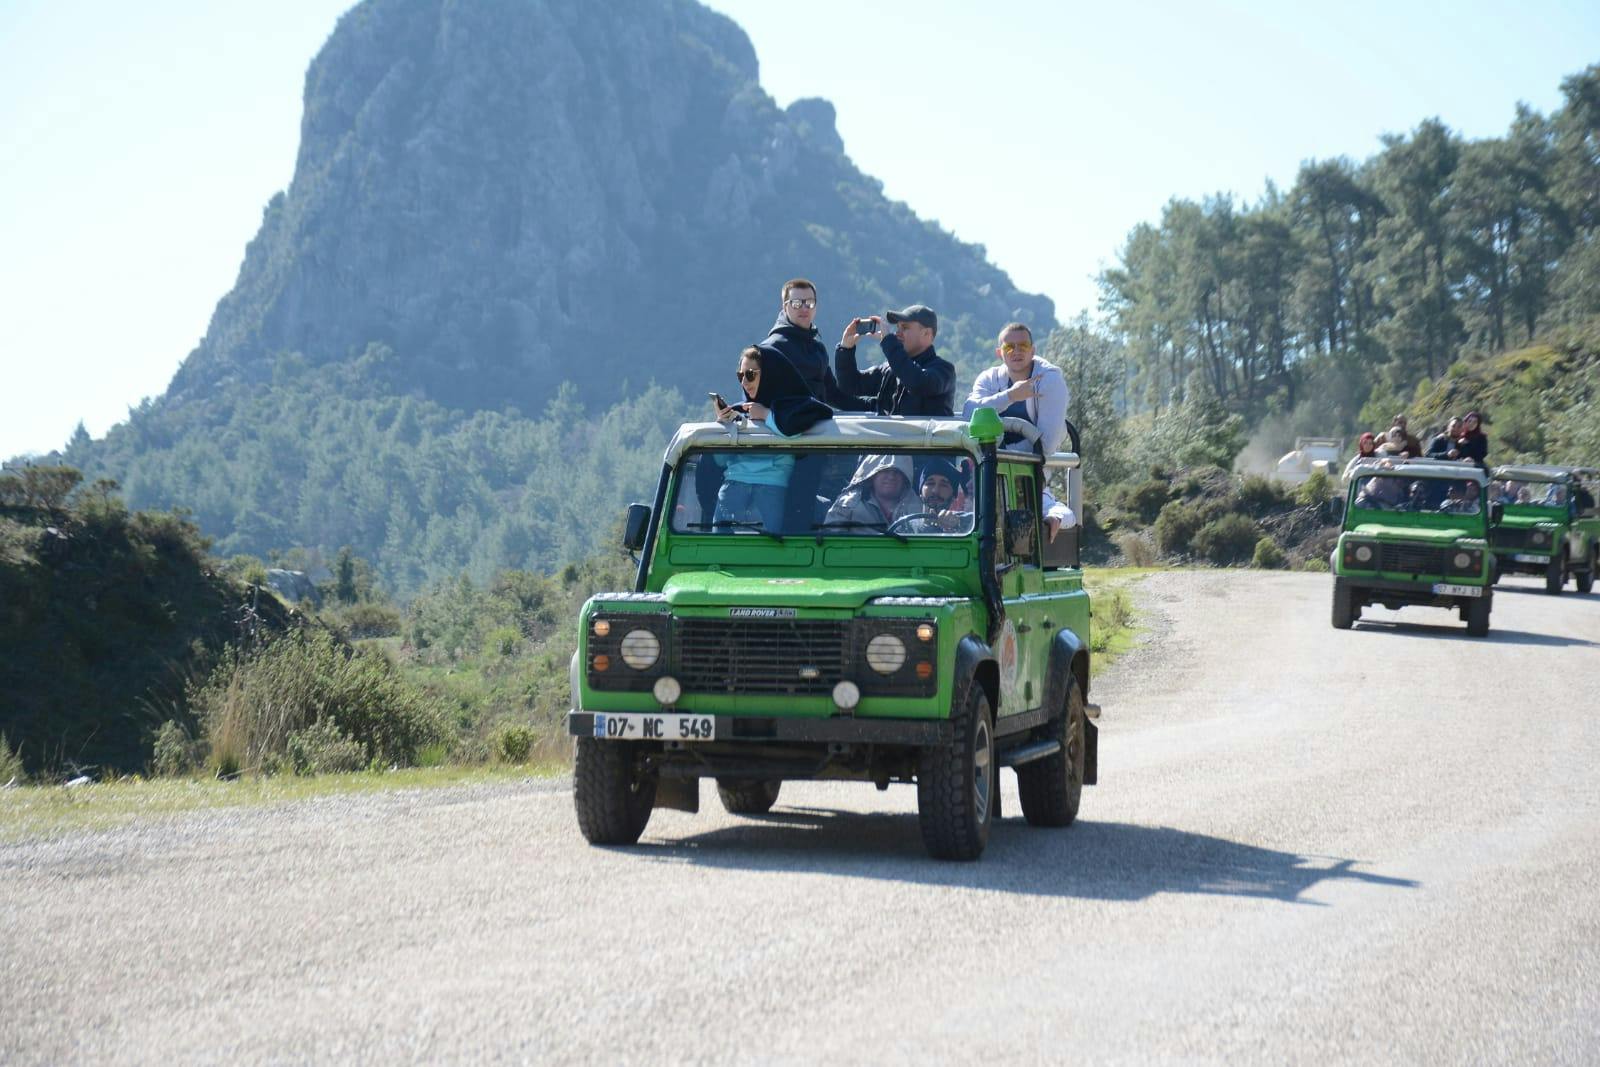 Product image for 7 in 1 Jeep Safari Adventure from Alanya